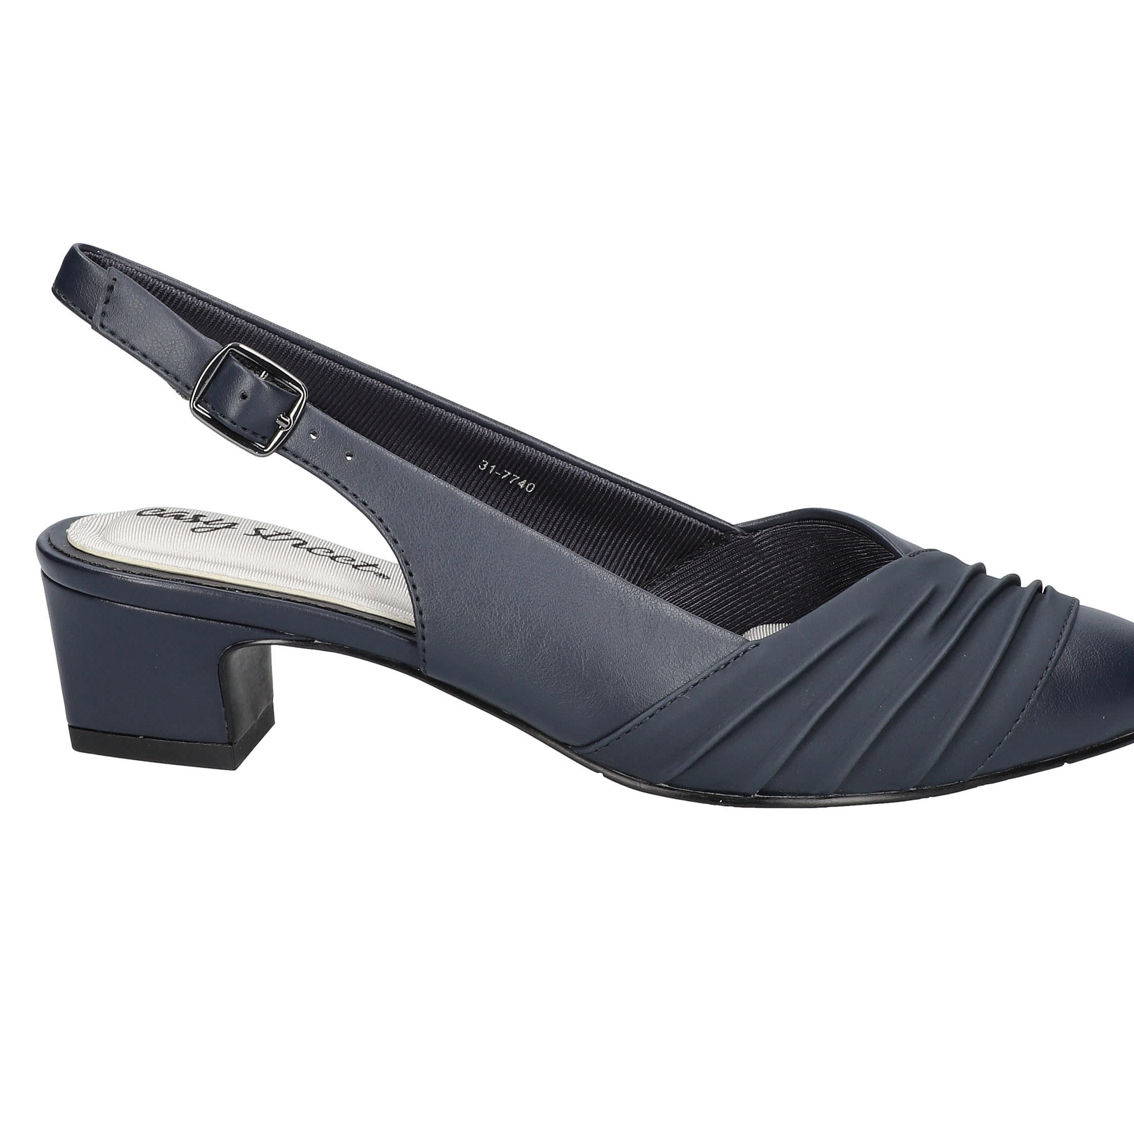 Bates by Easy Street Slingback Pumps - Image 3 of 5